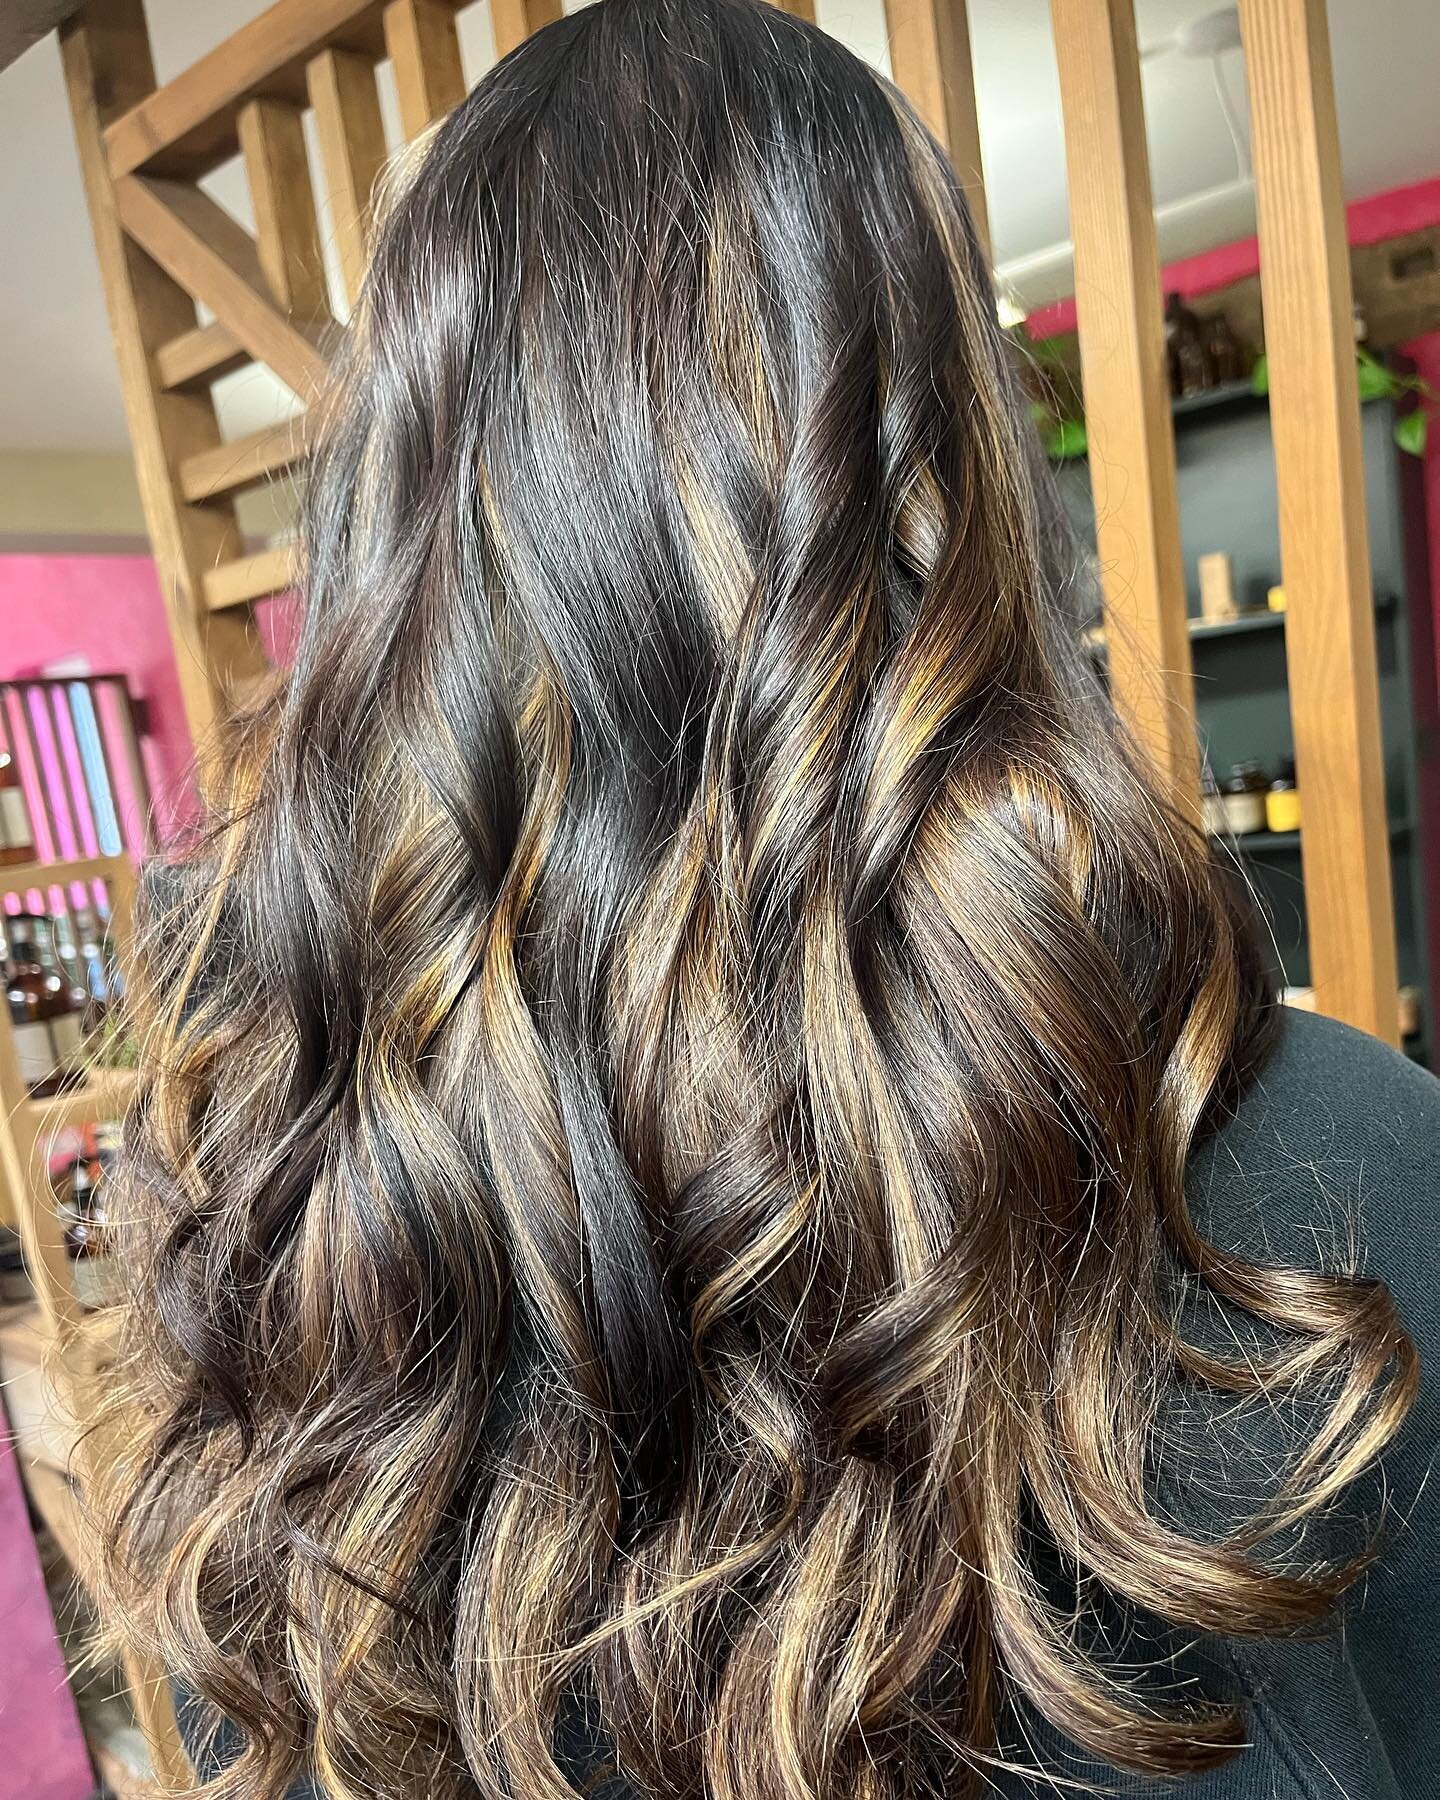 Happy Friday people! Here&rsquo;s some pretty hair #prettyhair #prettygirl #happyfriday #goodhairfriday #weekendready #dark #multitonal #oway #owayofficial #owaycolour #owayshine #organiccolour #organiclife #instahair #instagood #l4l